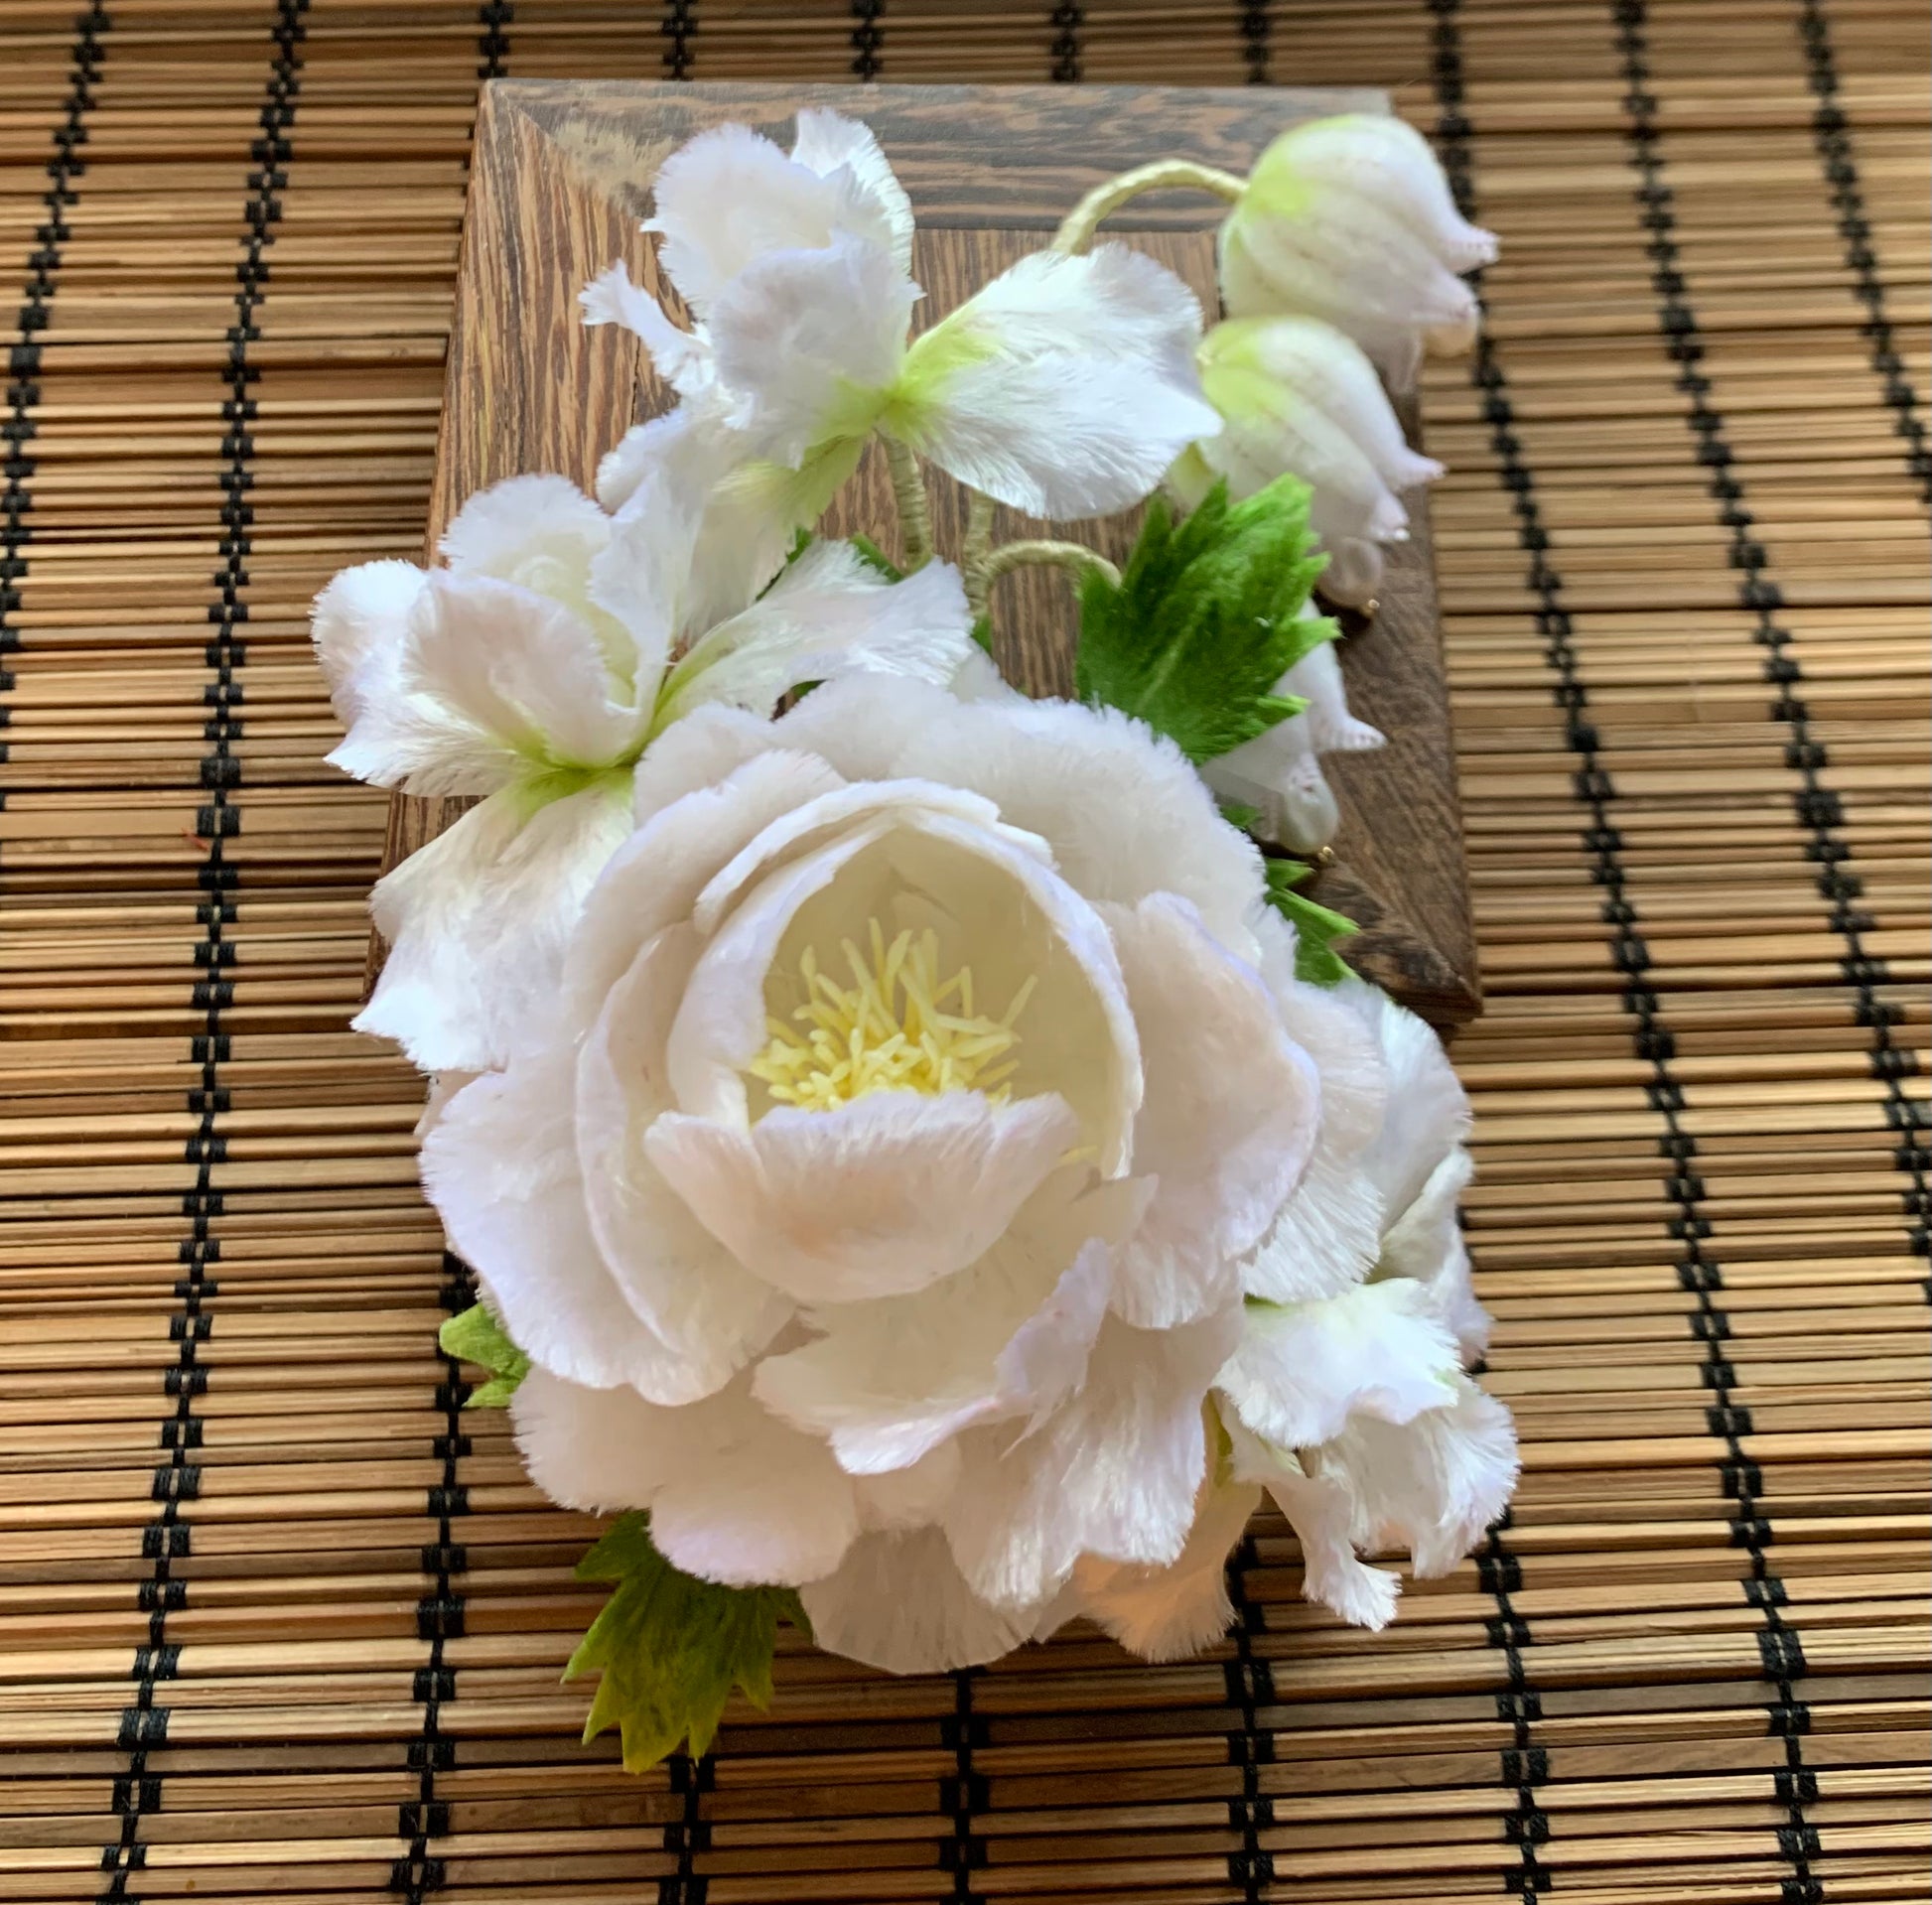 White Peony Wrist corsages for your wedding or Graduation Ball